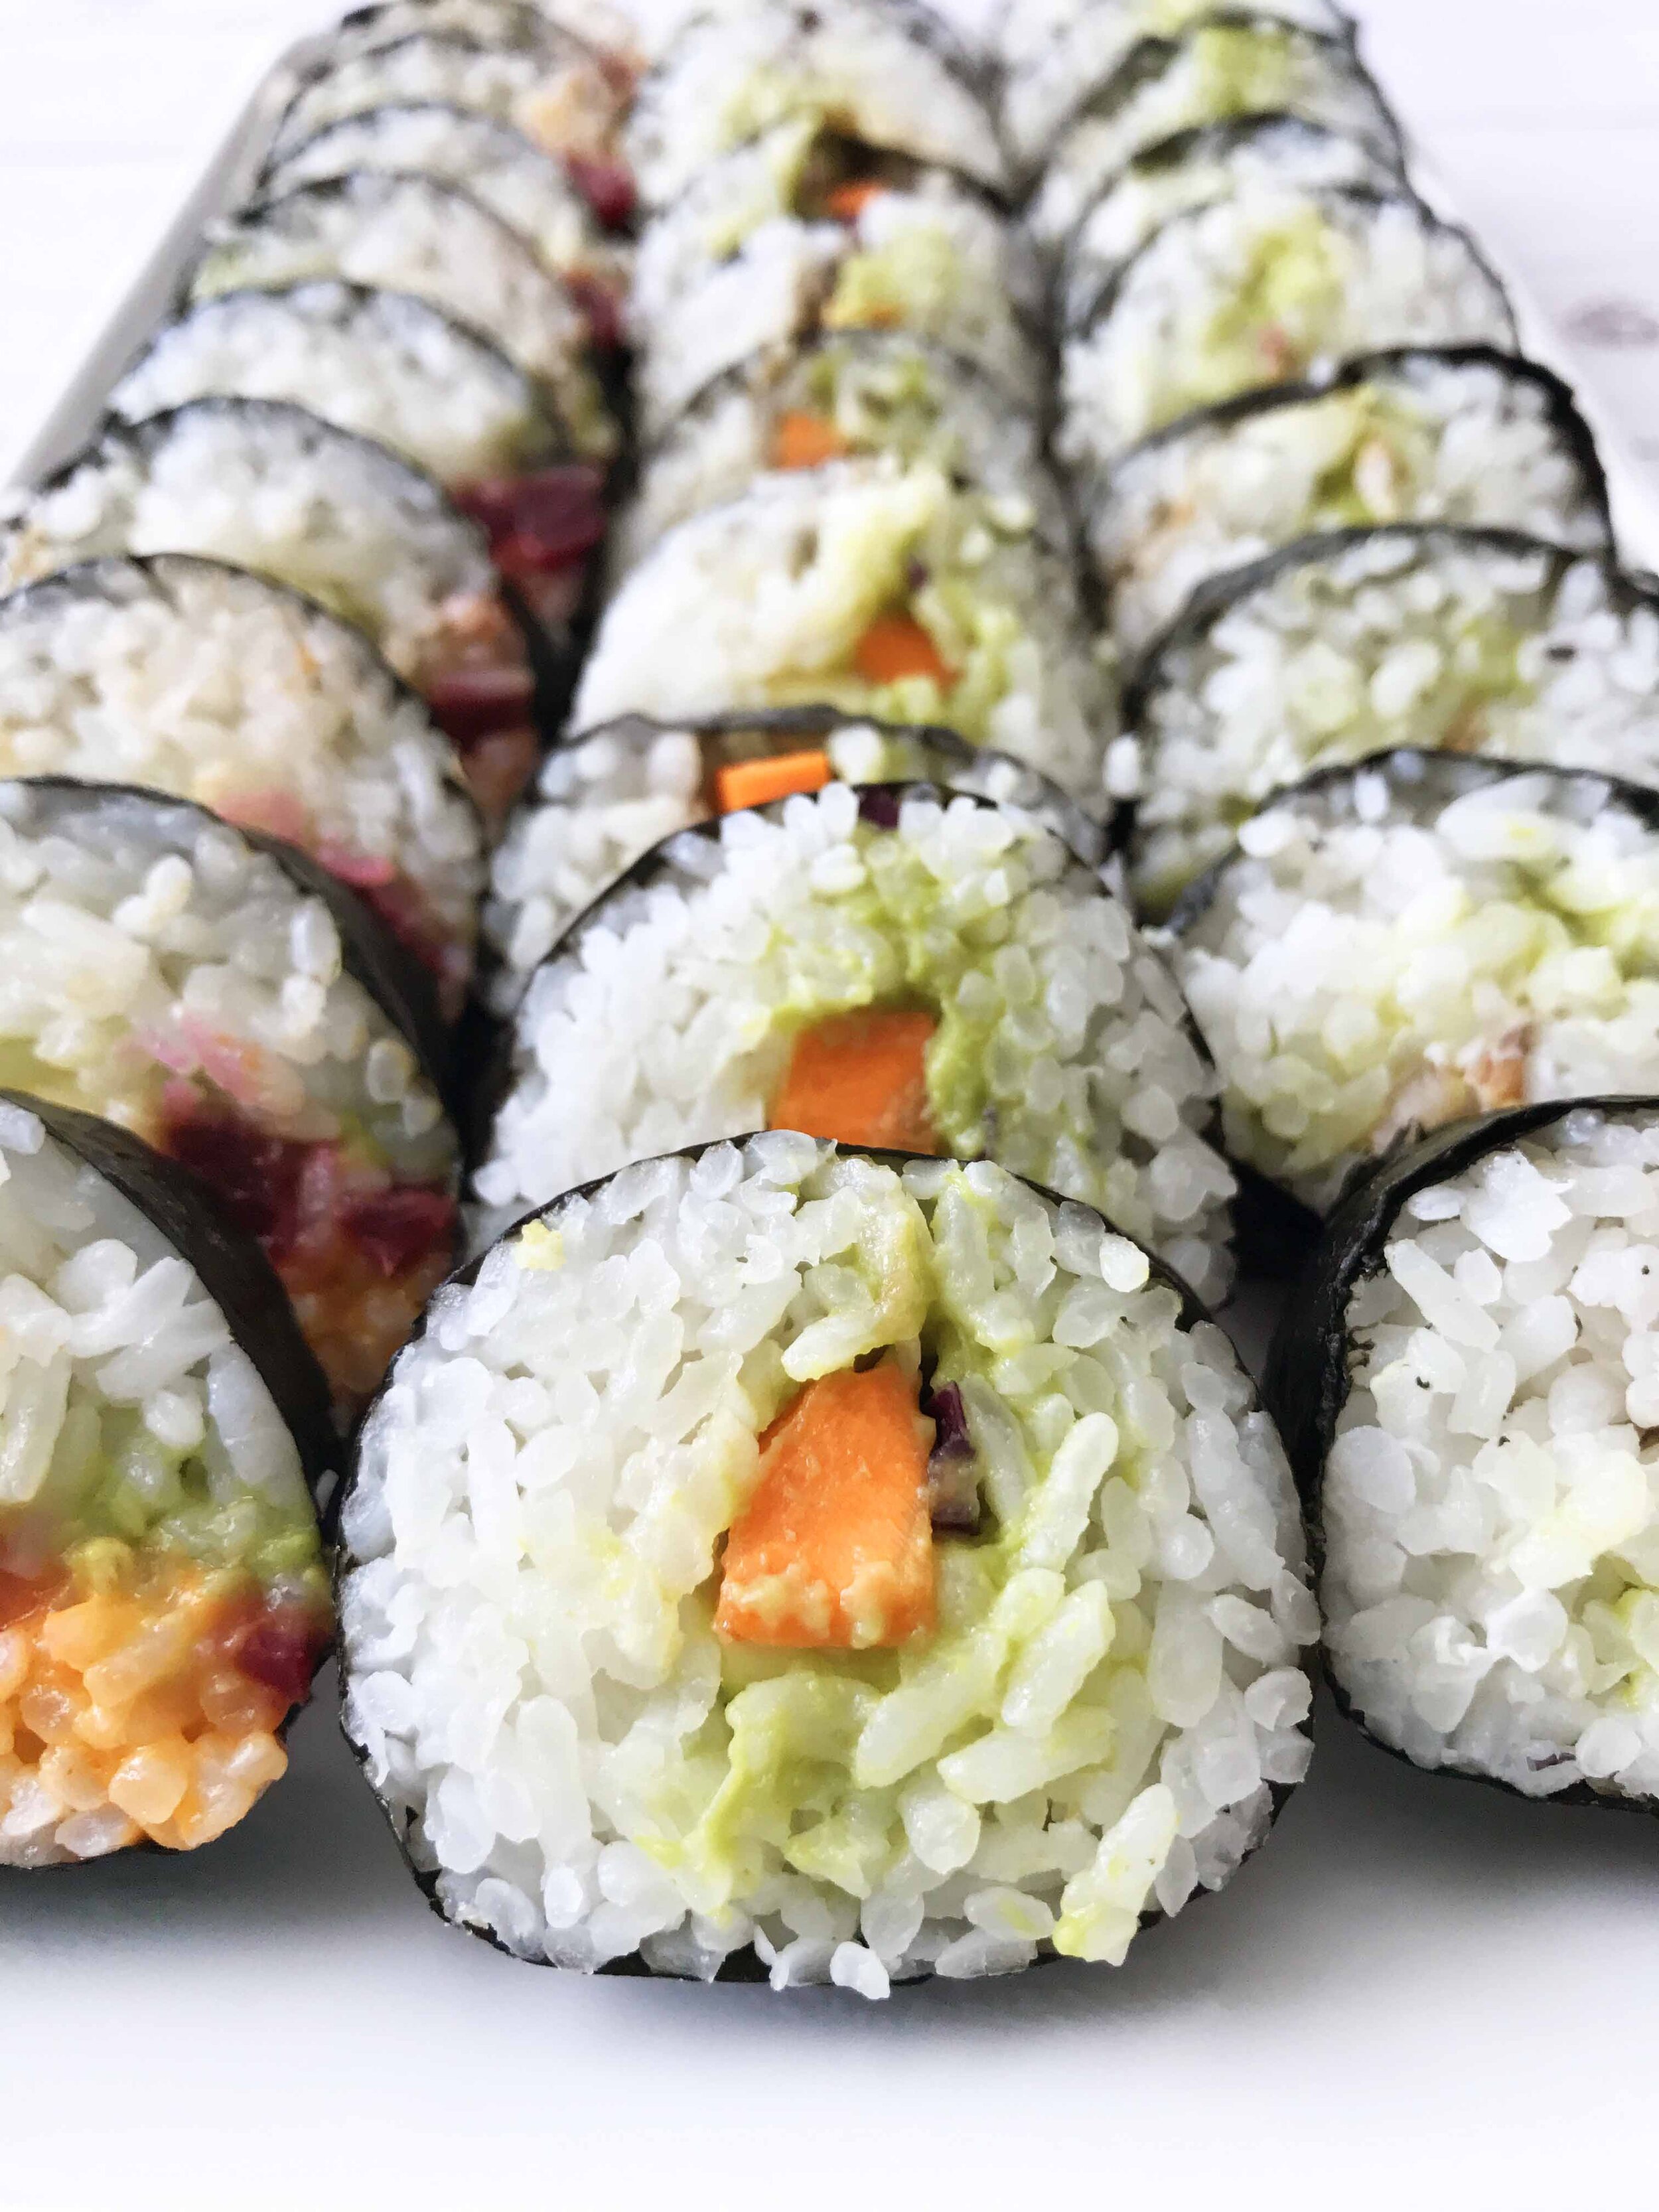 Is Sushi Veg: Vegetarian Visions in Sushi Delights